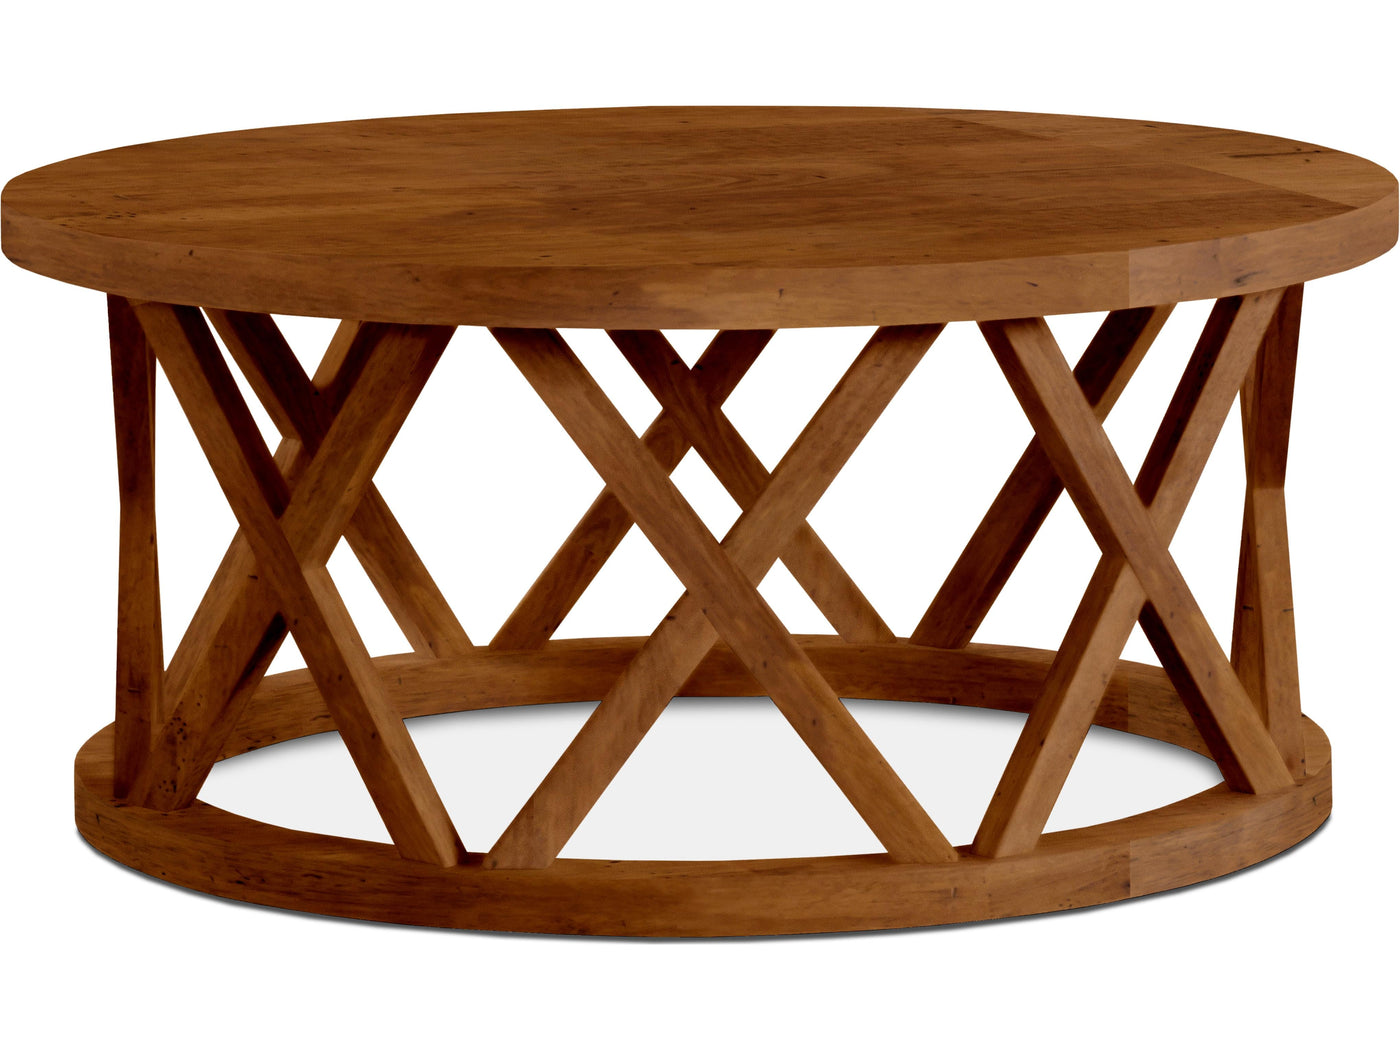 The Aspen Coffee Table